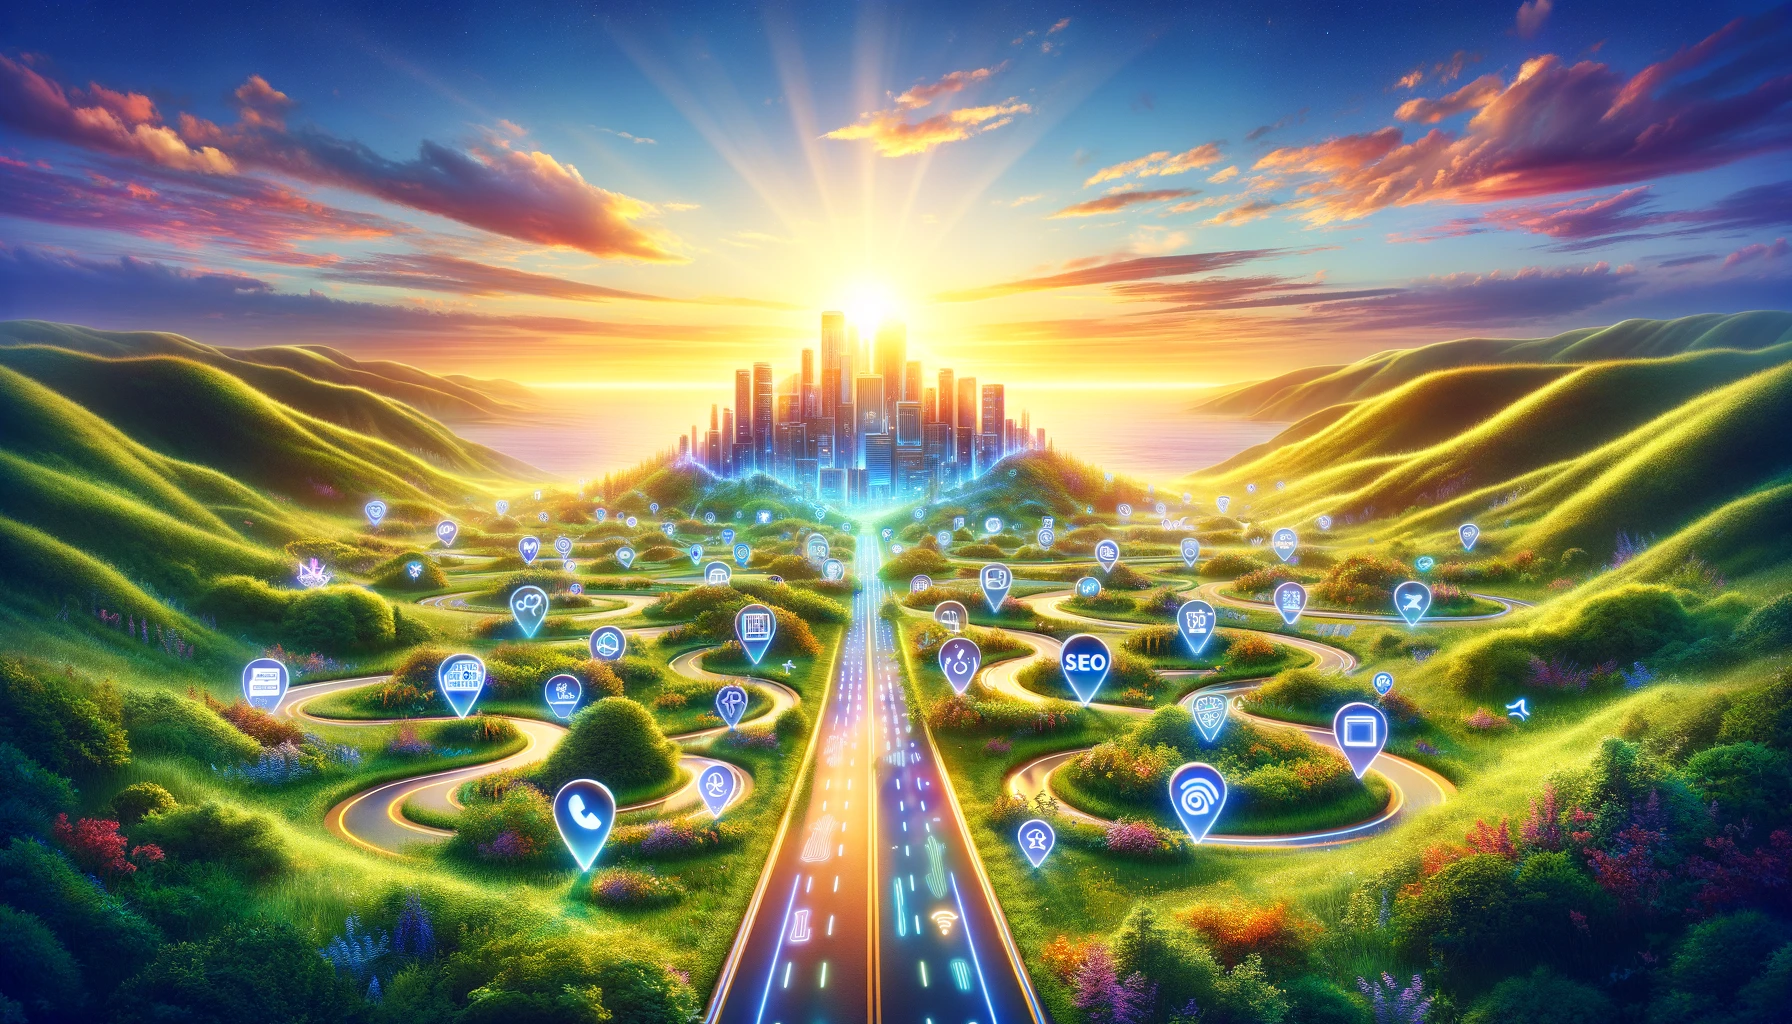 Natural Traffic Growth - A digital landscape with SEO pathways leading to a vibrant, successful website city, surrounded by lush organic growth symbols.